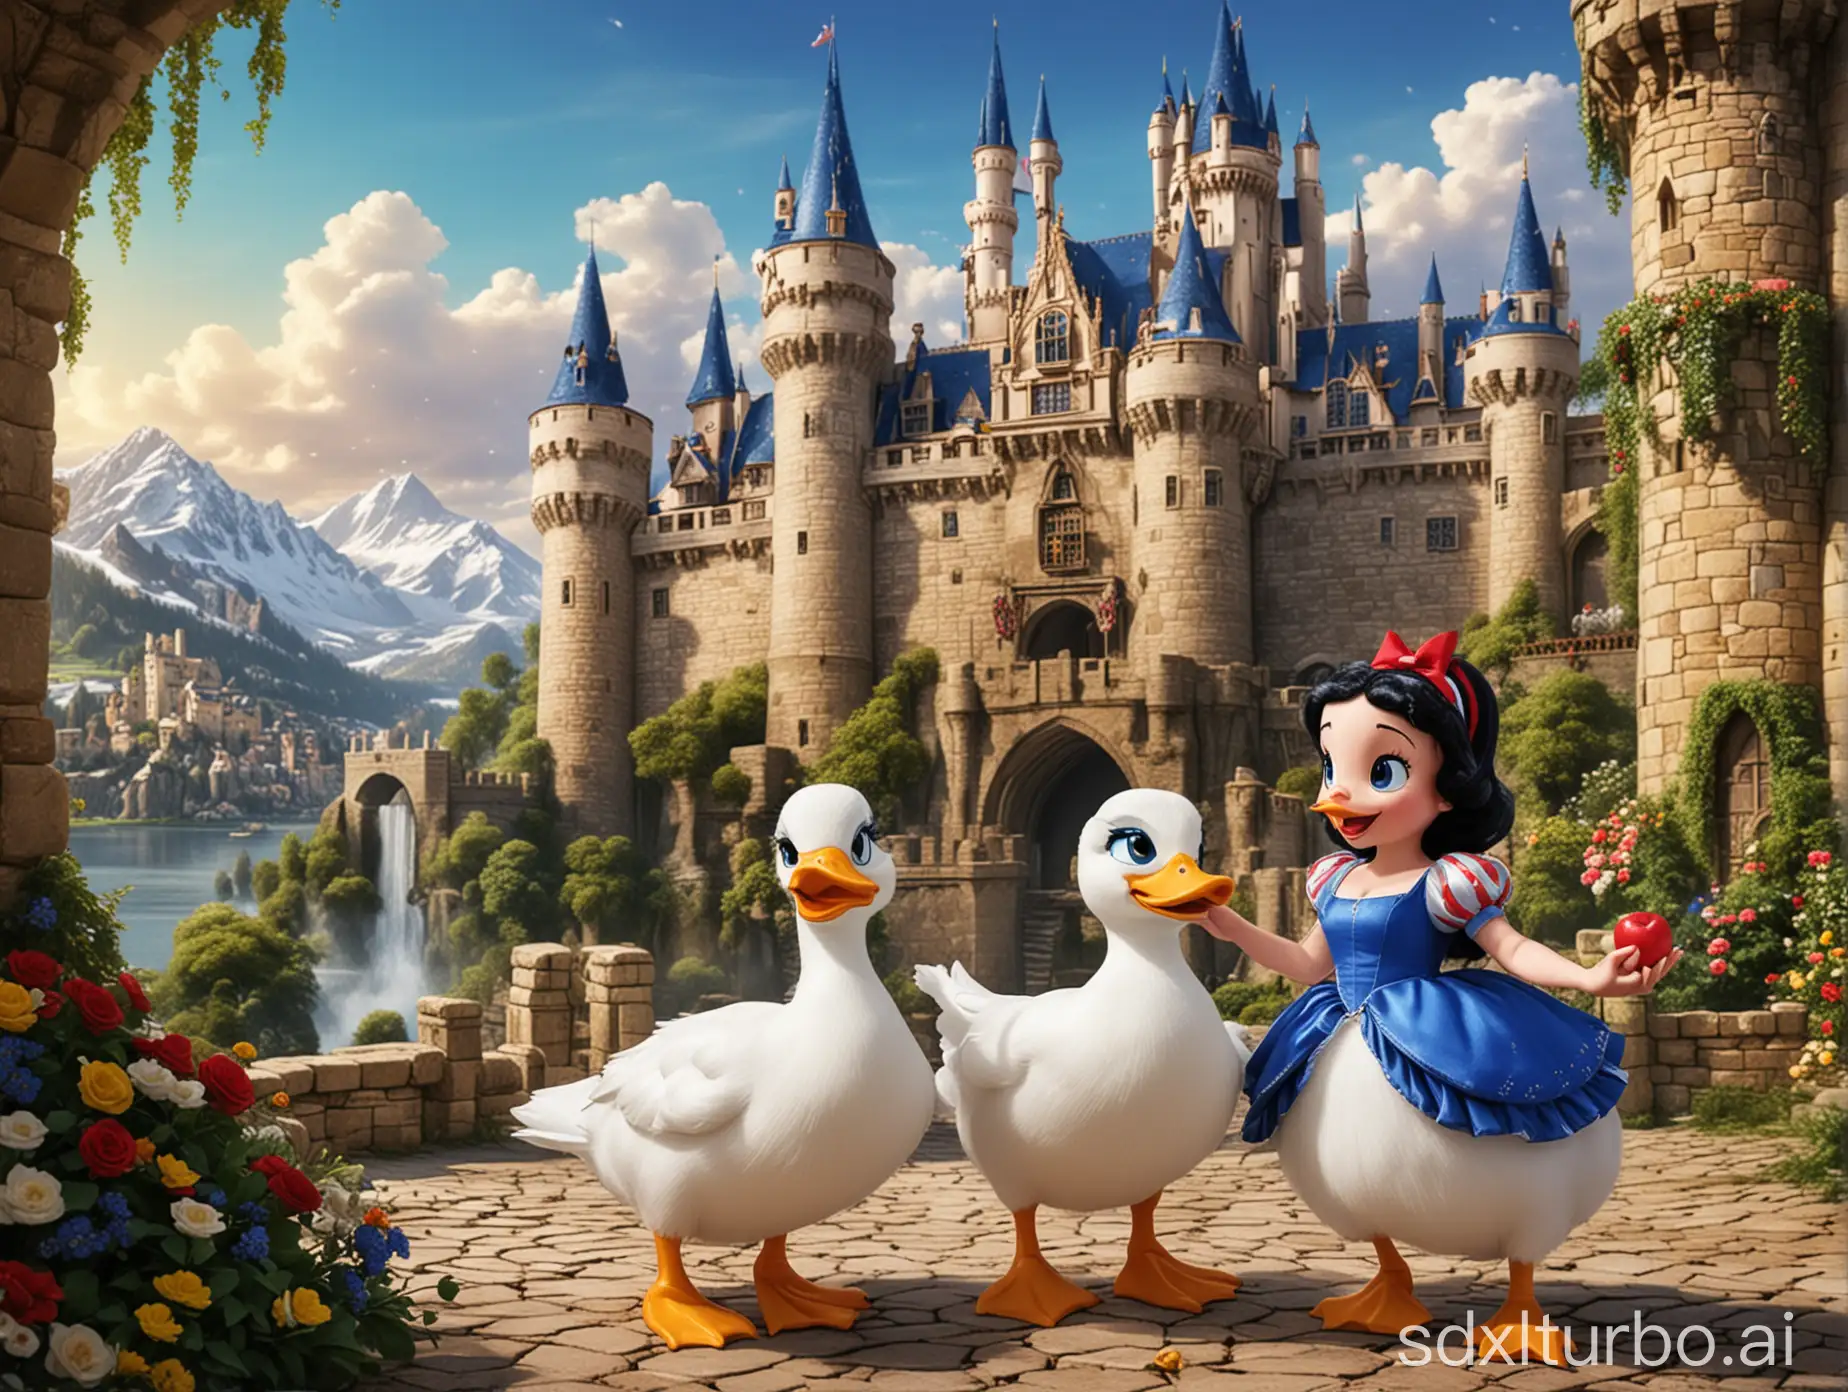 Canreach Duck and Snow White in the castle